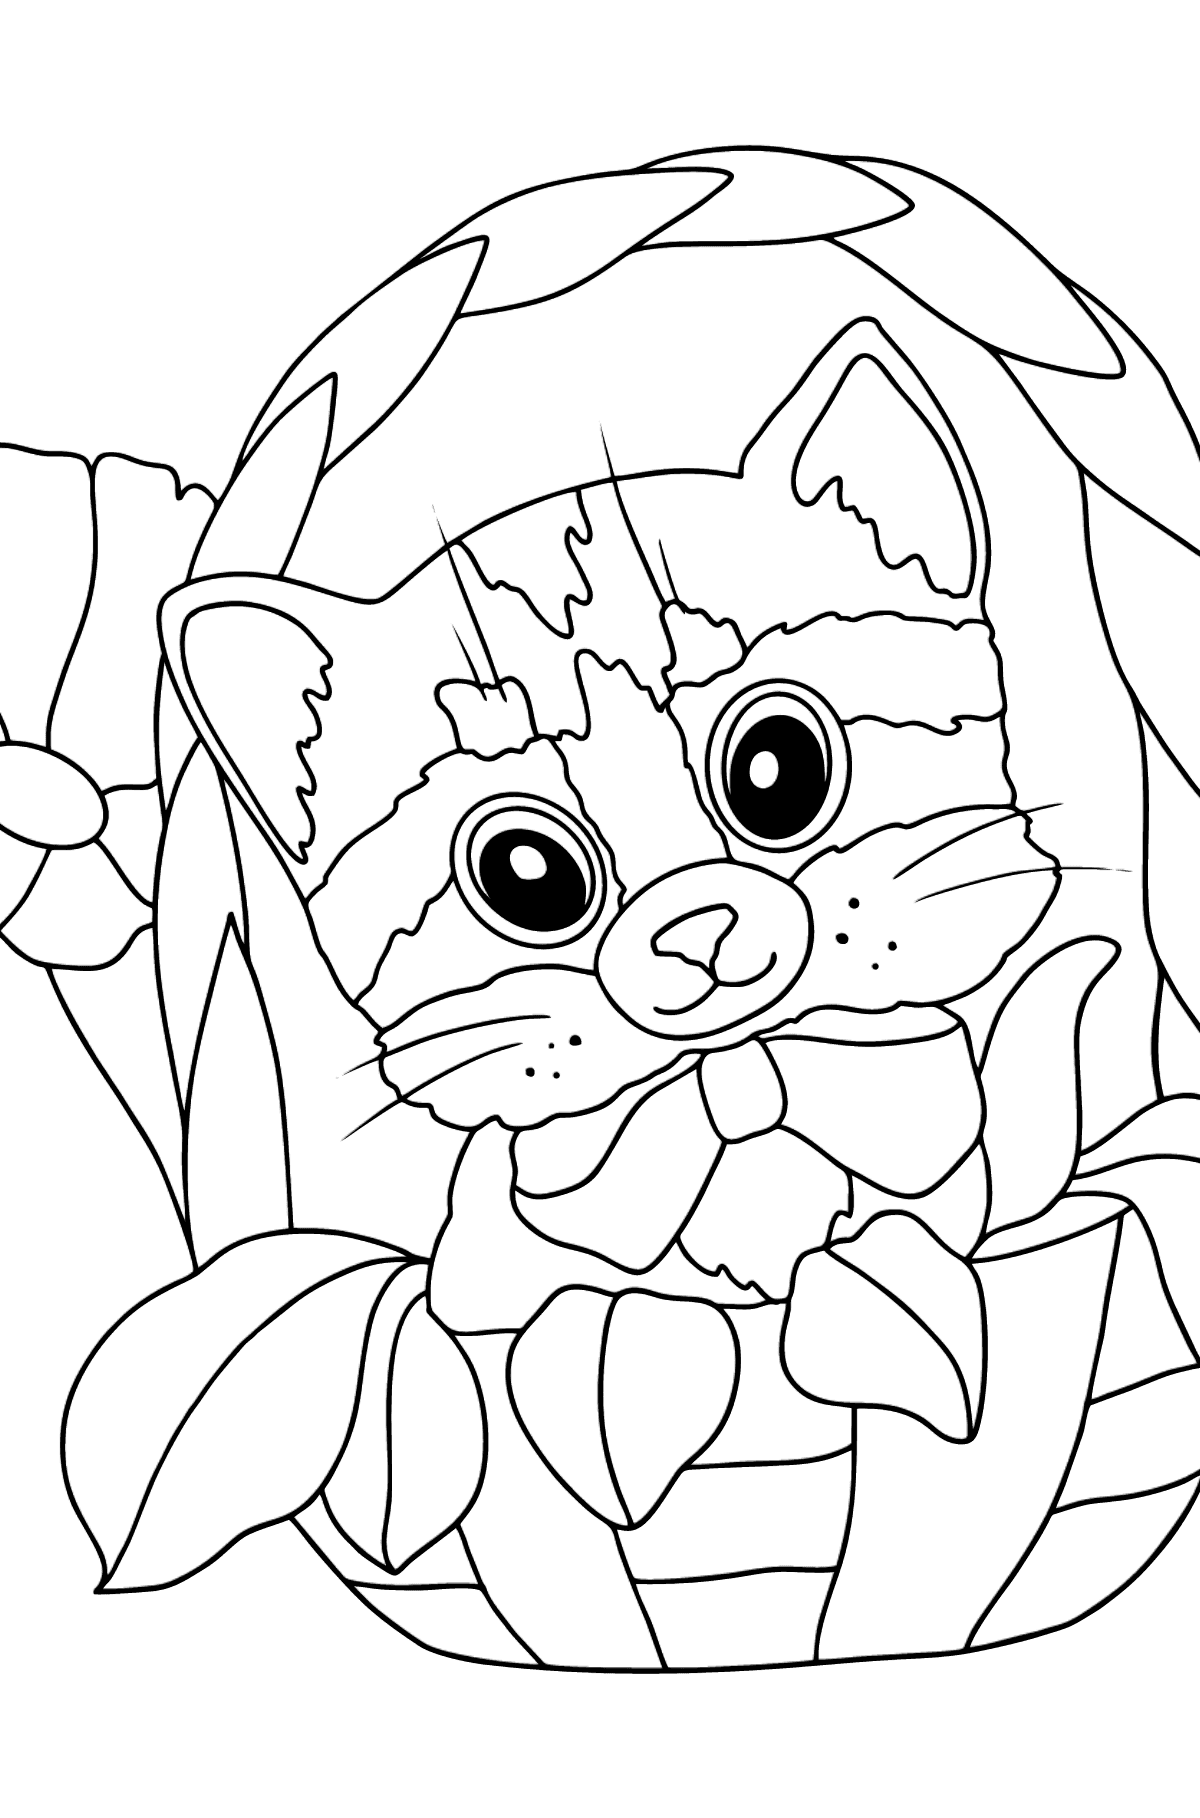 Kitten in a Basket coloring page - Coloring Pages for Kids